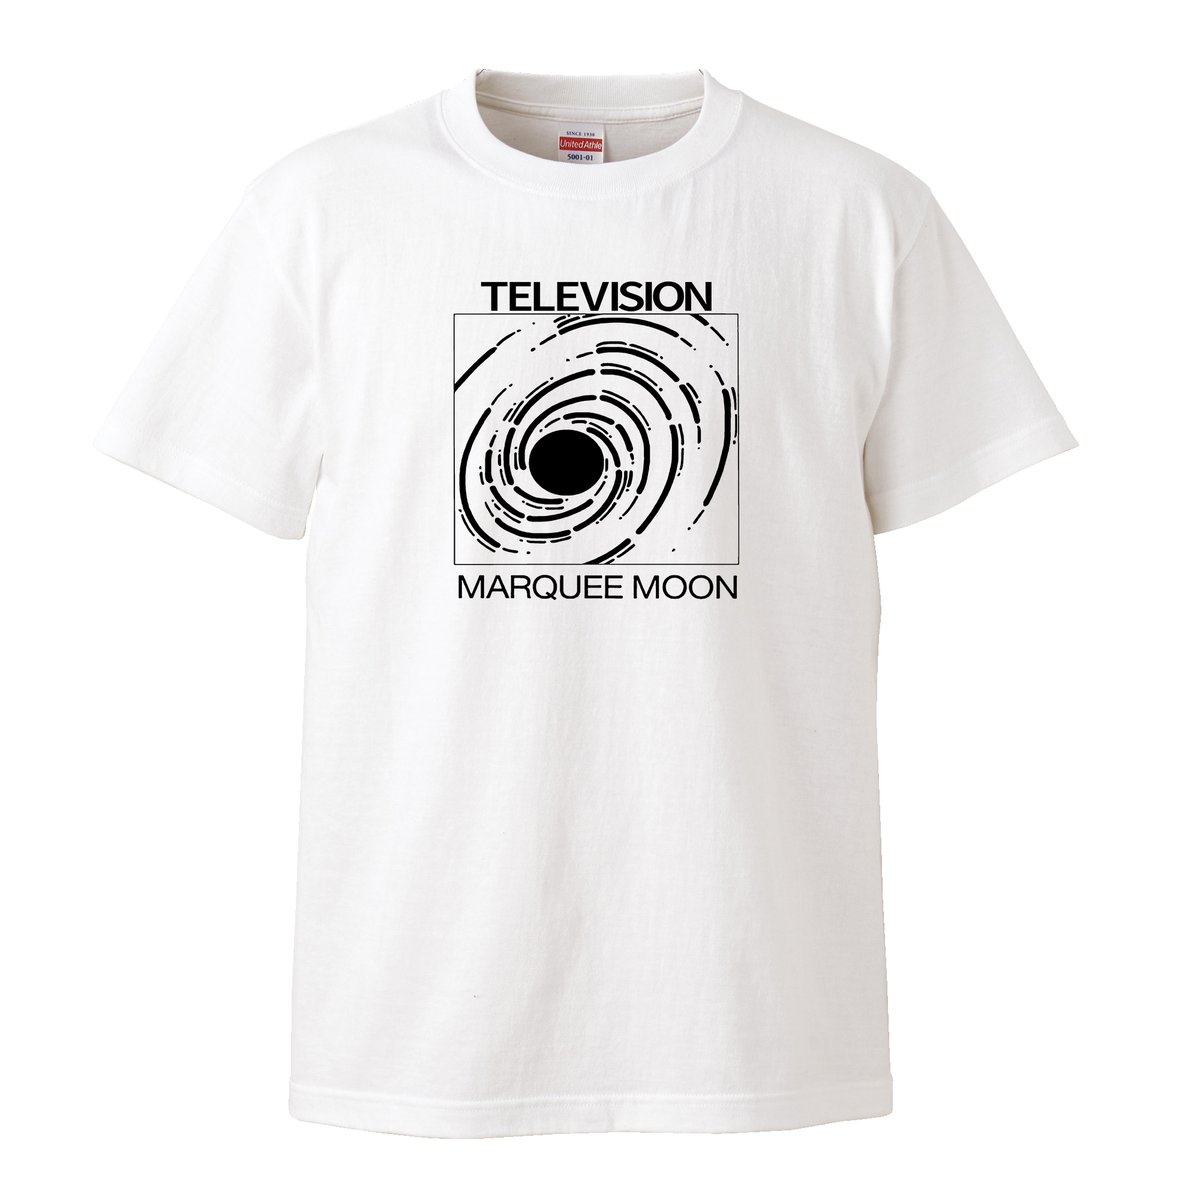 【TELEVISION / MARQUEE MOON】5.6オンス Tシャツ/WH/ST- 776